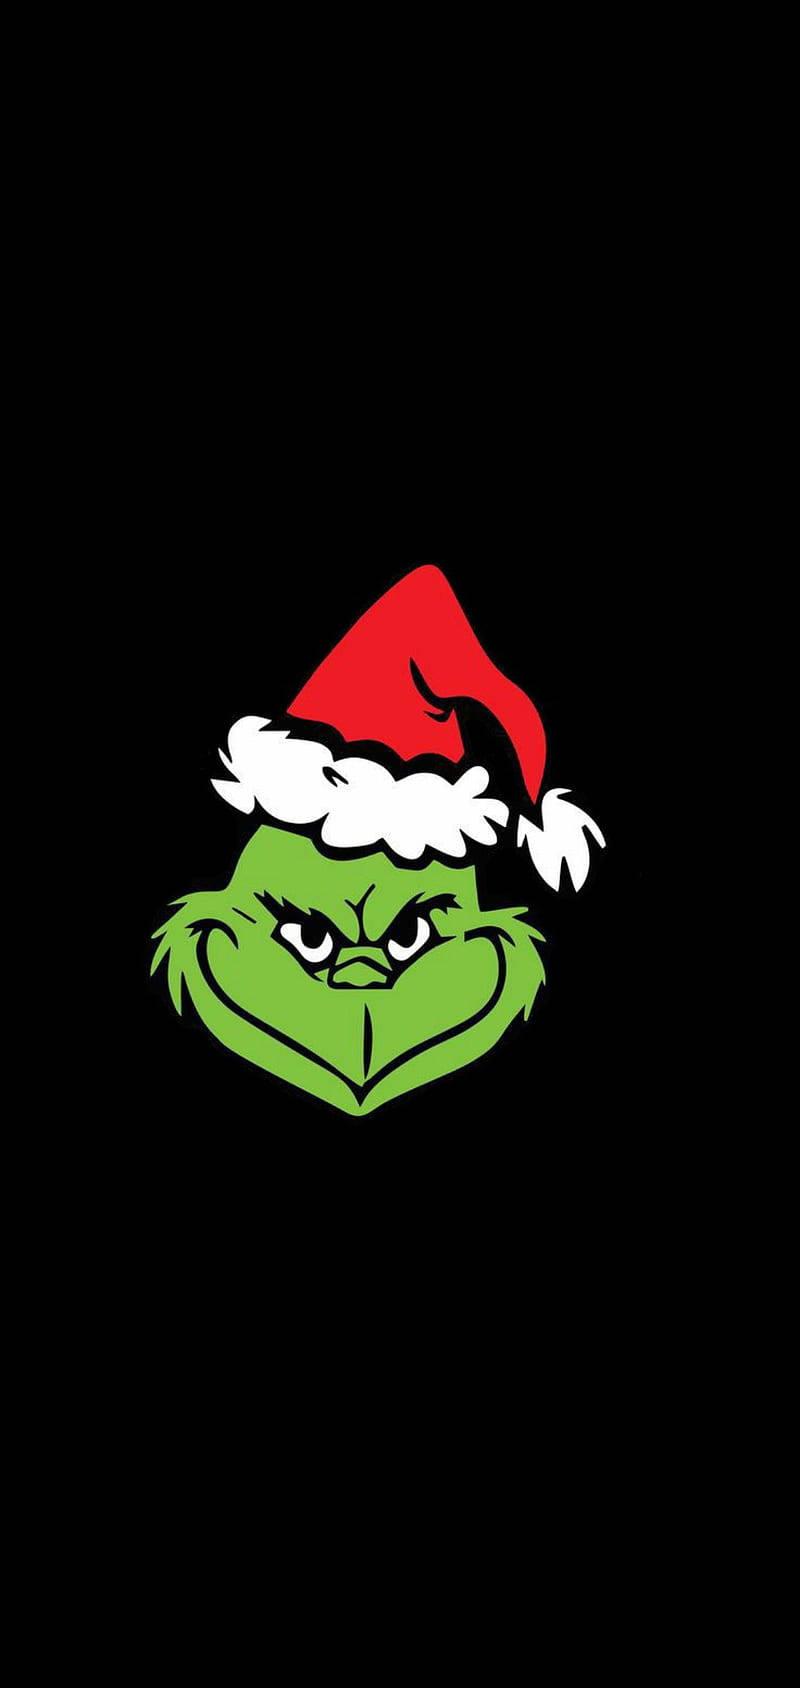 Download The Grinch Head Wallpaper